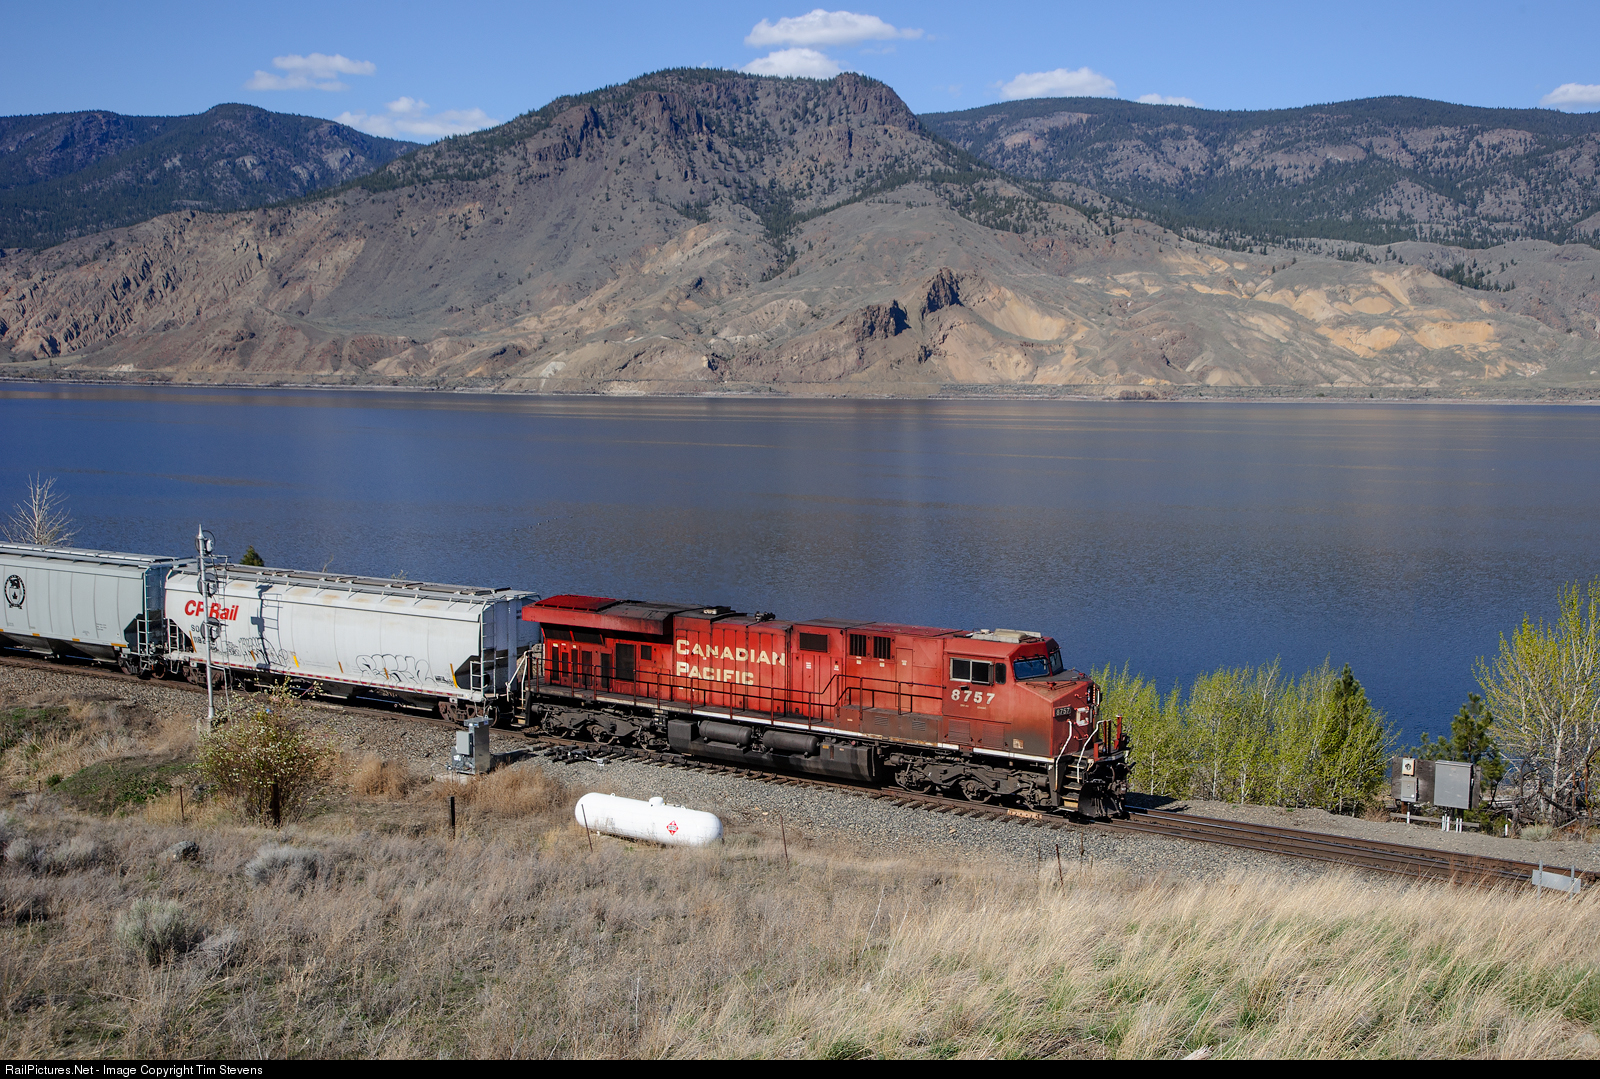 RailPictures.Net Photo: CP 8757 Canadian Pacific Railway GE ES44AC at  Tobiano, British Columbia, Canada by Tim Stevens